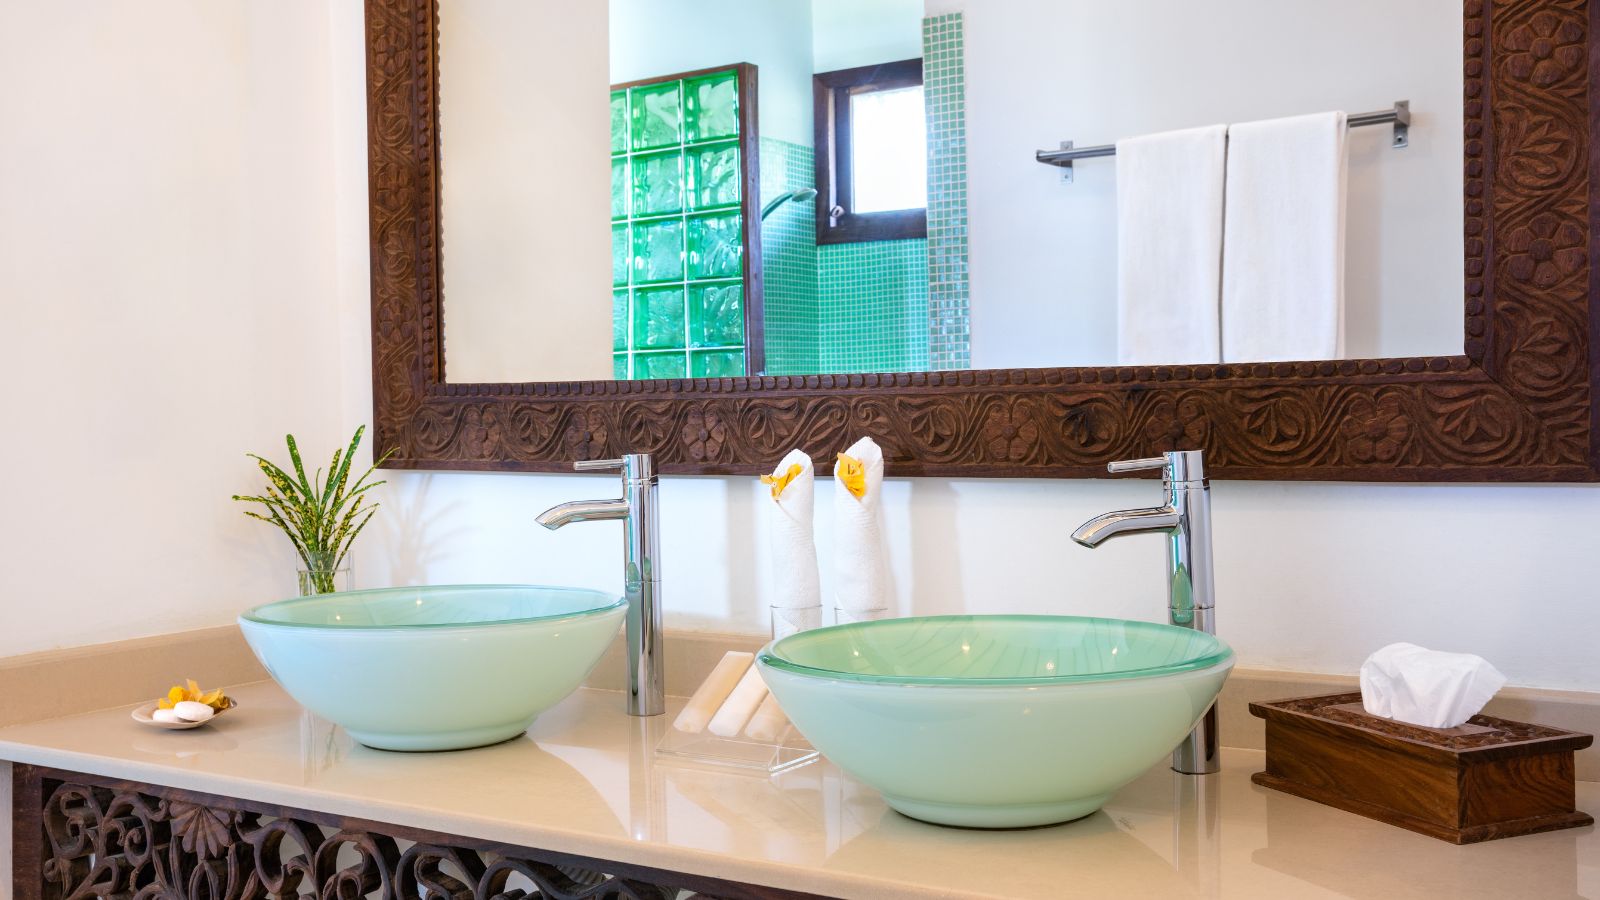 How a freestanding double bathroom sink can transform your bathroom
